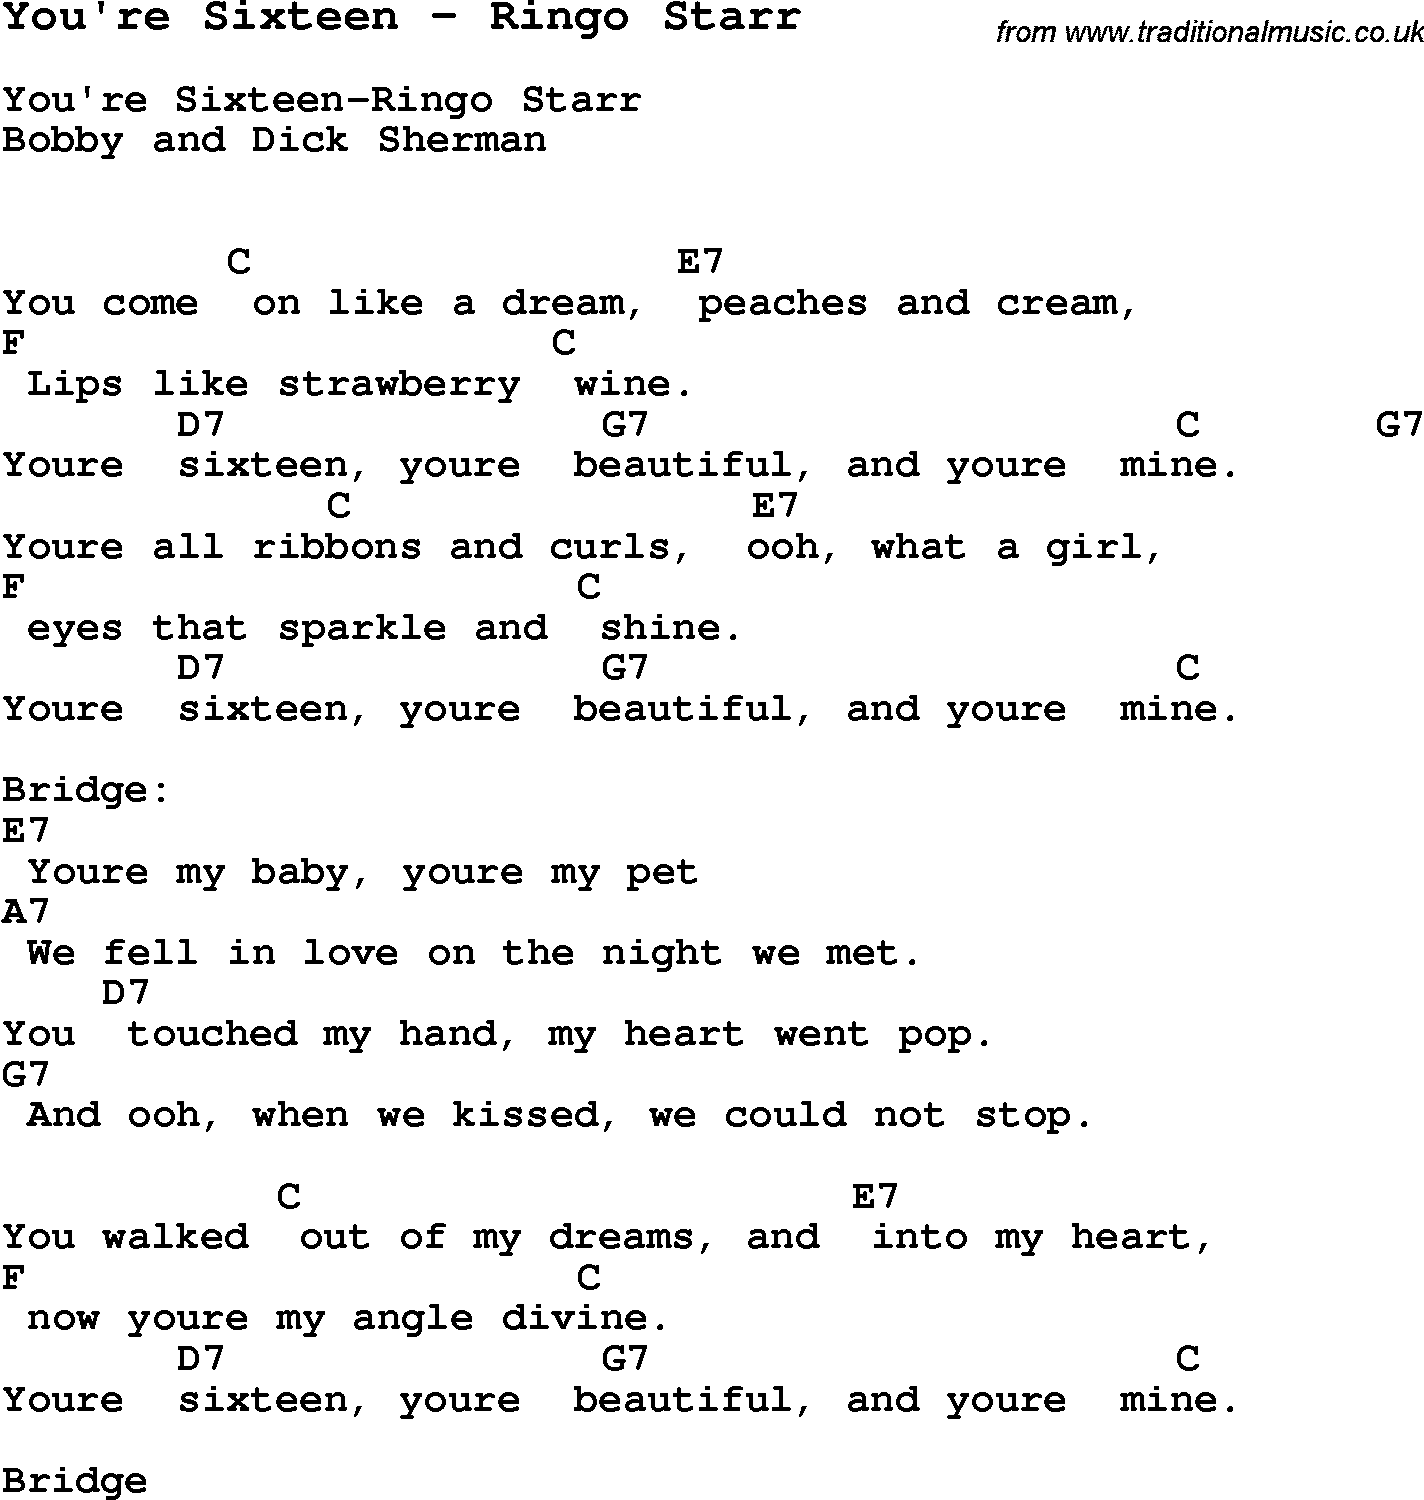 Song You're Sixteen by Ringo Starr, with lyrics for vocal performance and accompaniment chords for Ukulele, Guitar Banjo etc.